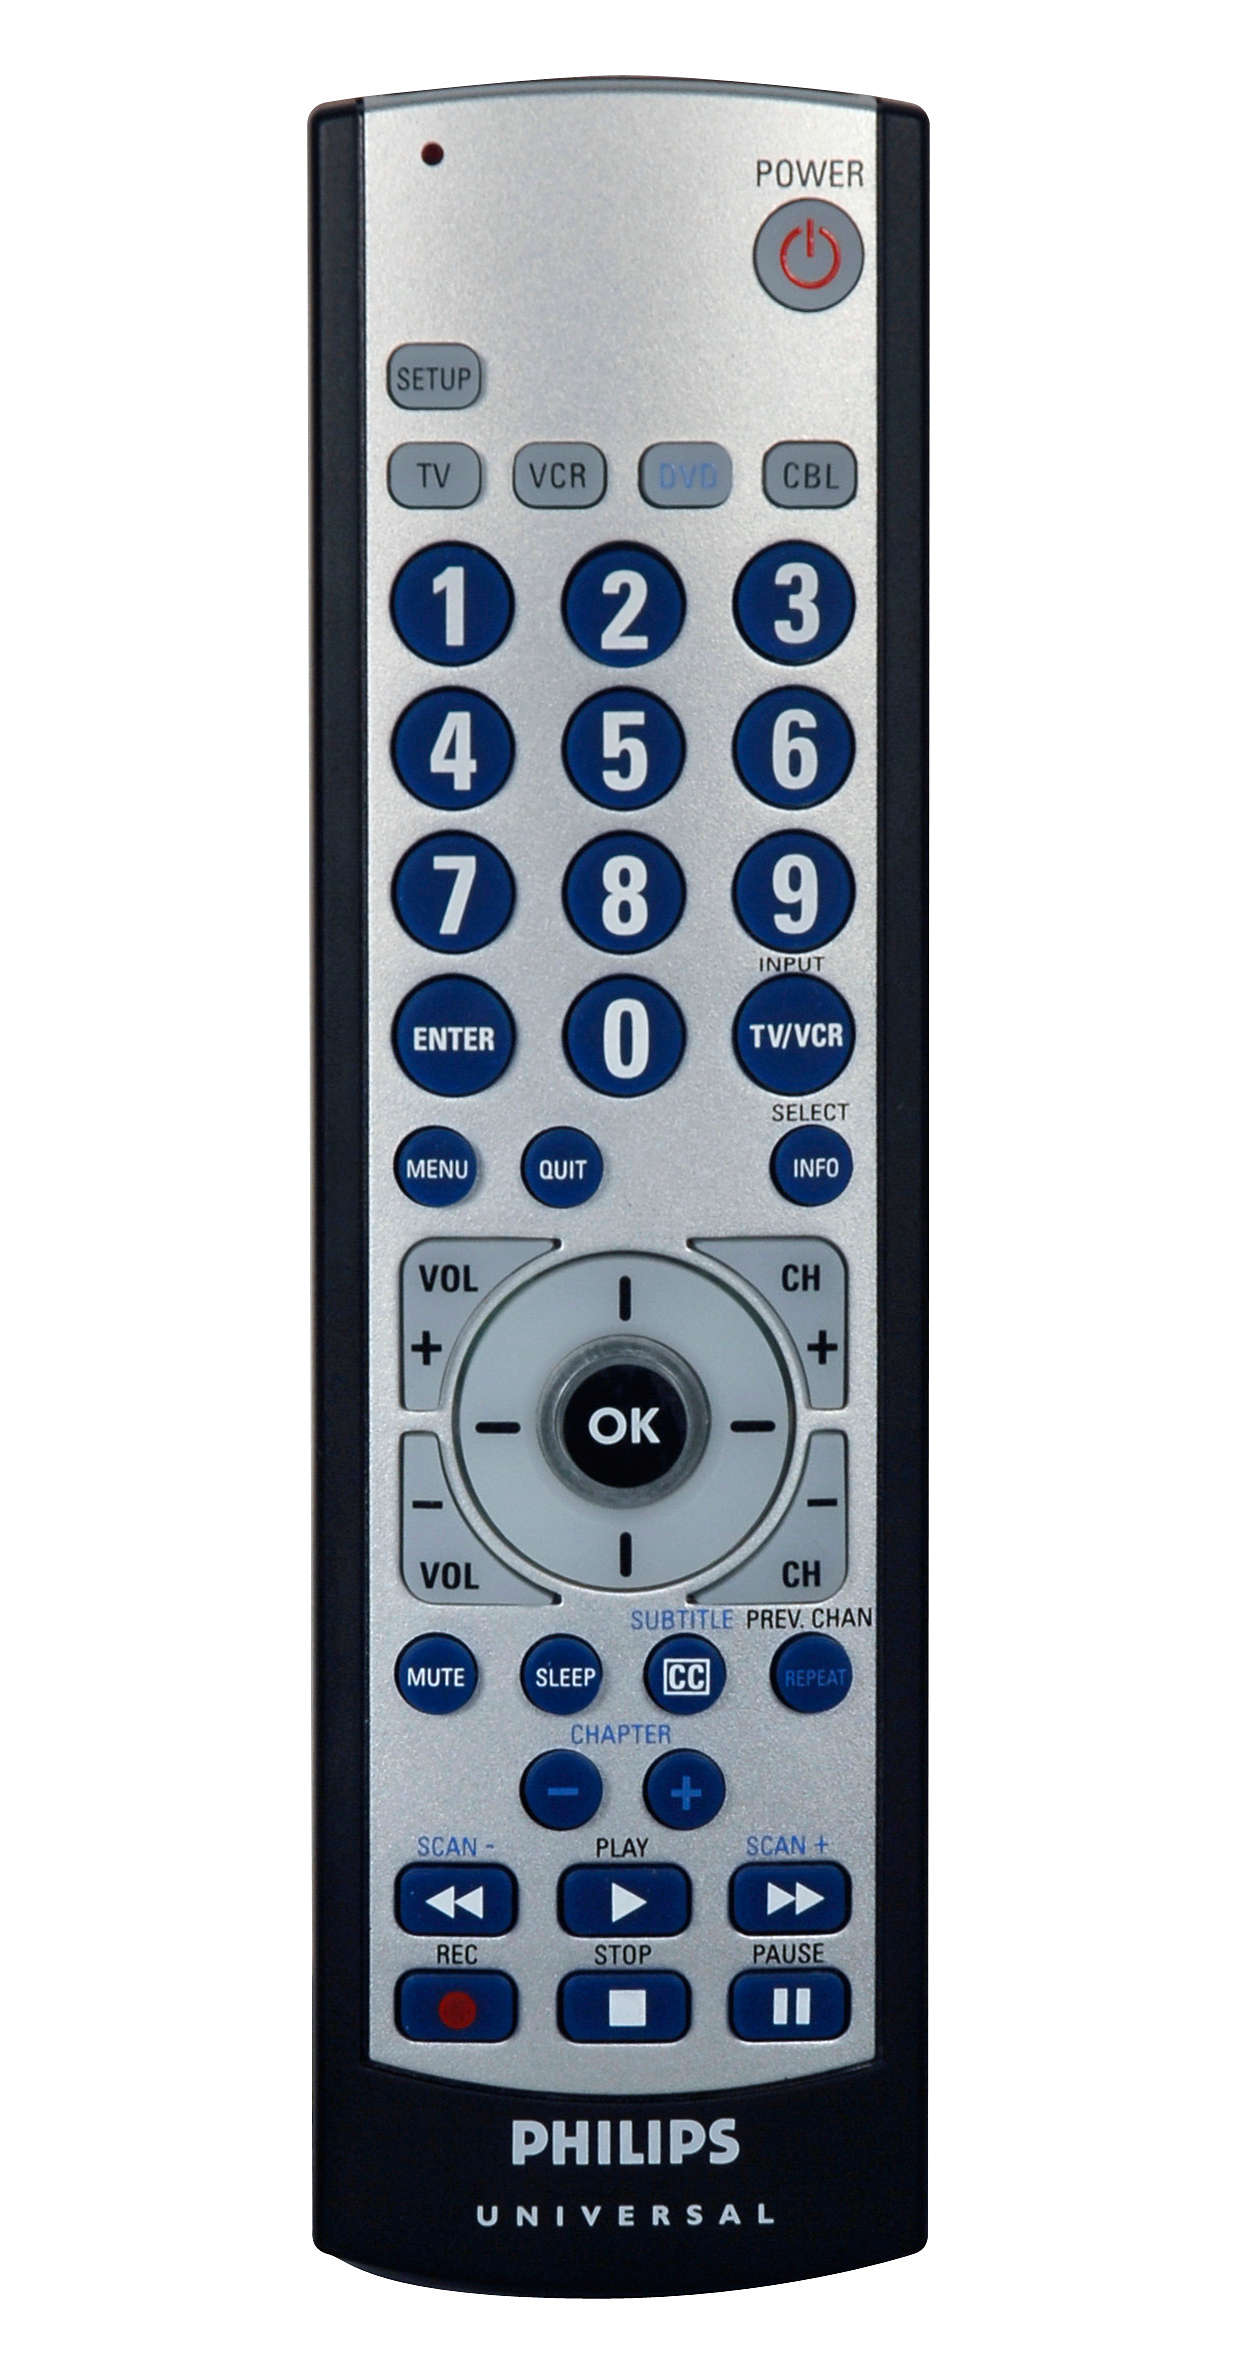 Ideal replacement for your lost or broken remote